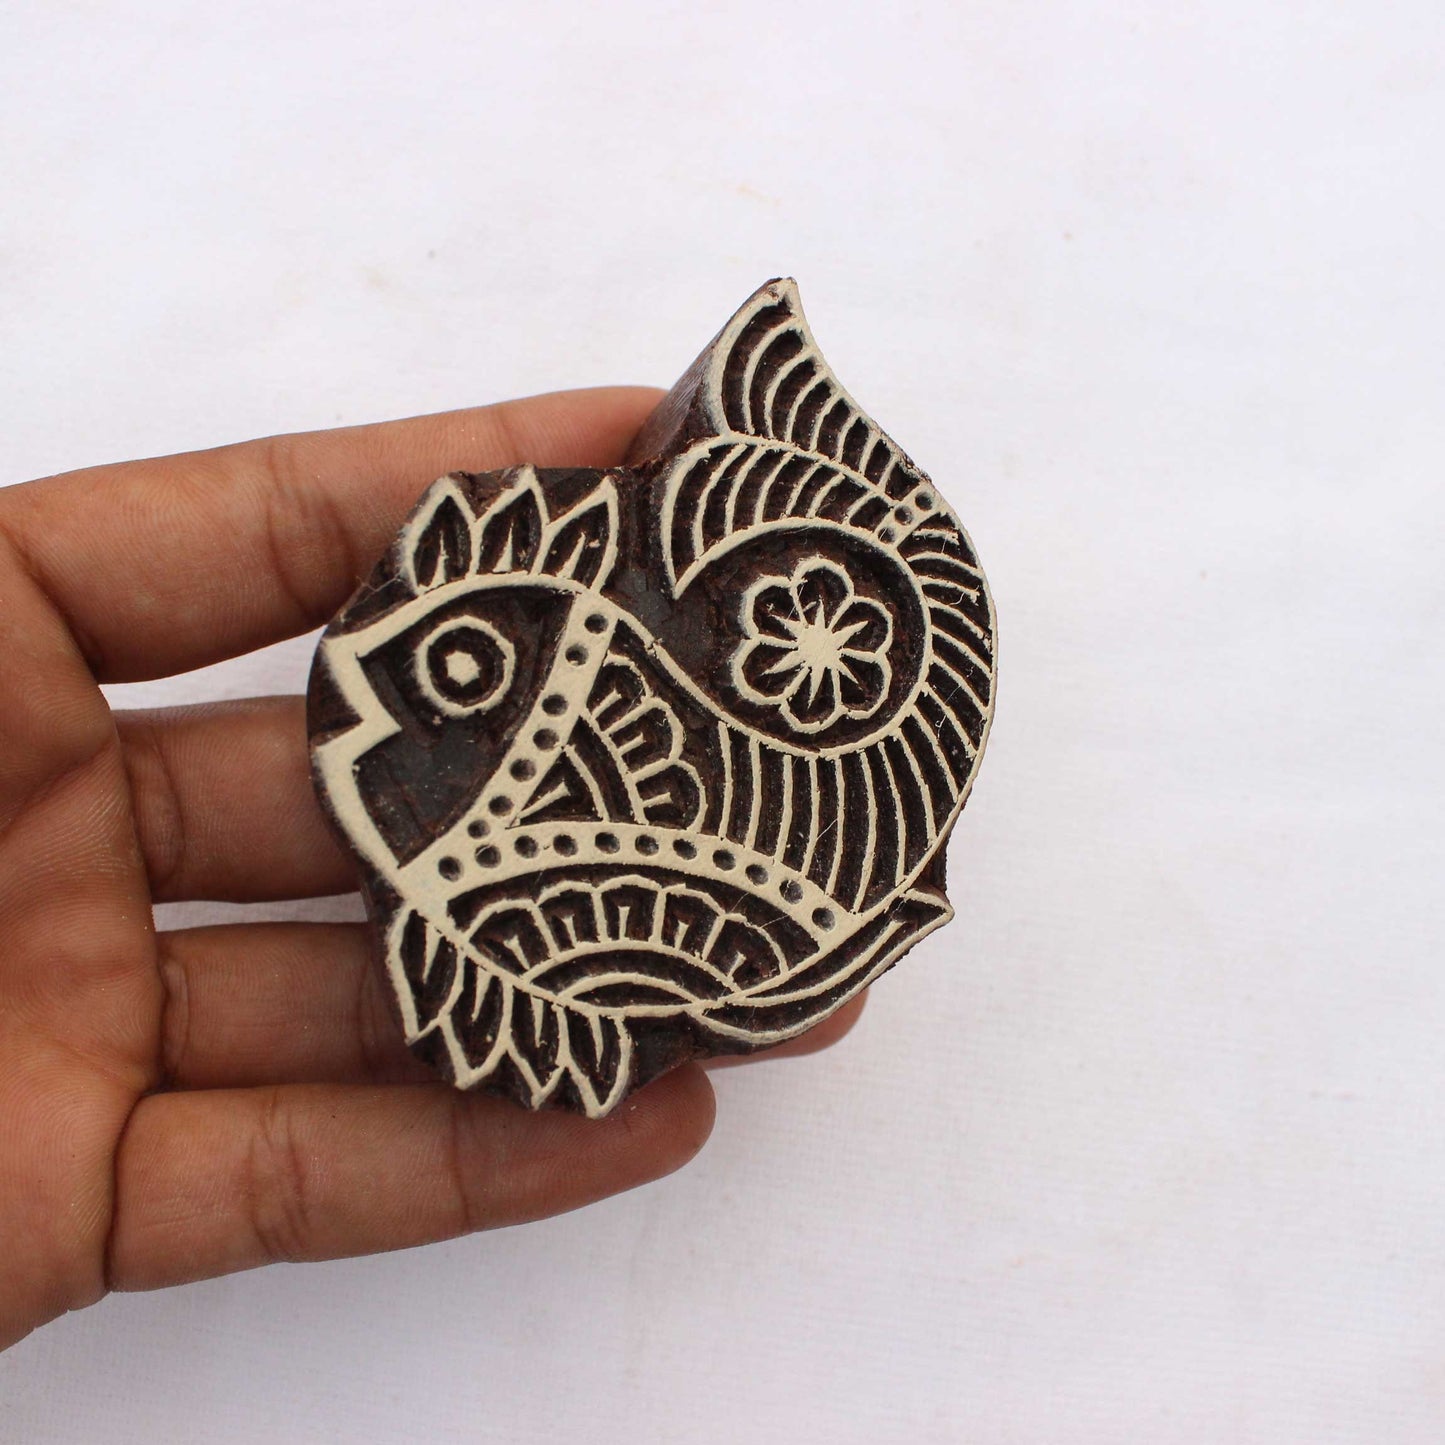 Fish Stamp Aquatic Fabric Stamp Indian Fabric Stamp Hand Carved Wooden Stamp For Printing Sea Soap Stamp Kids Craft Wooden Printing Block